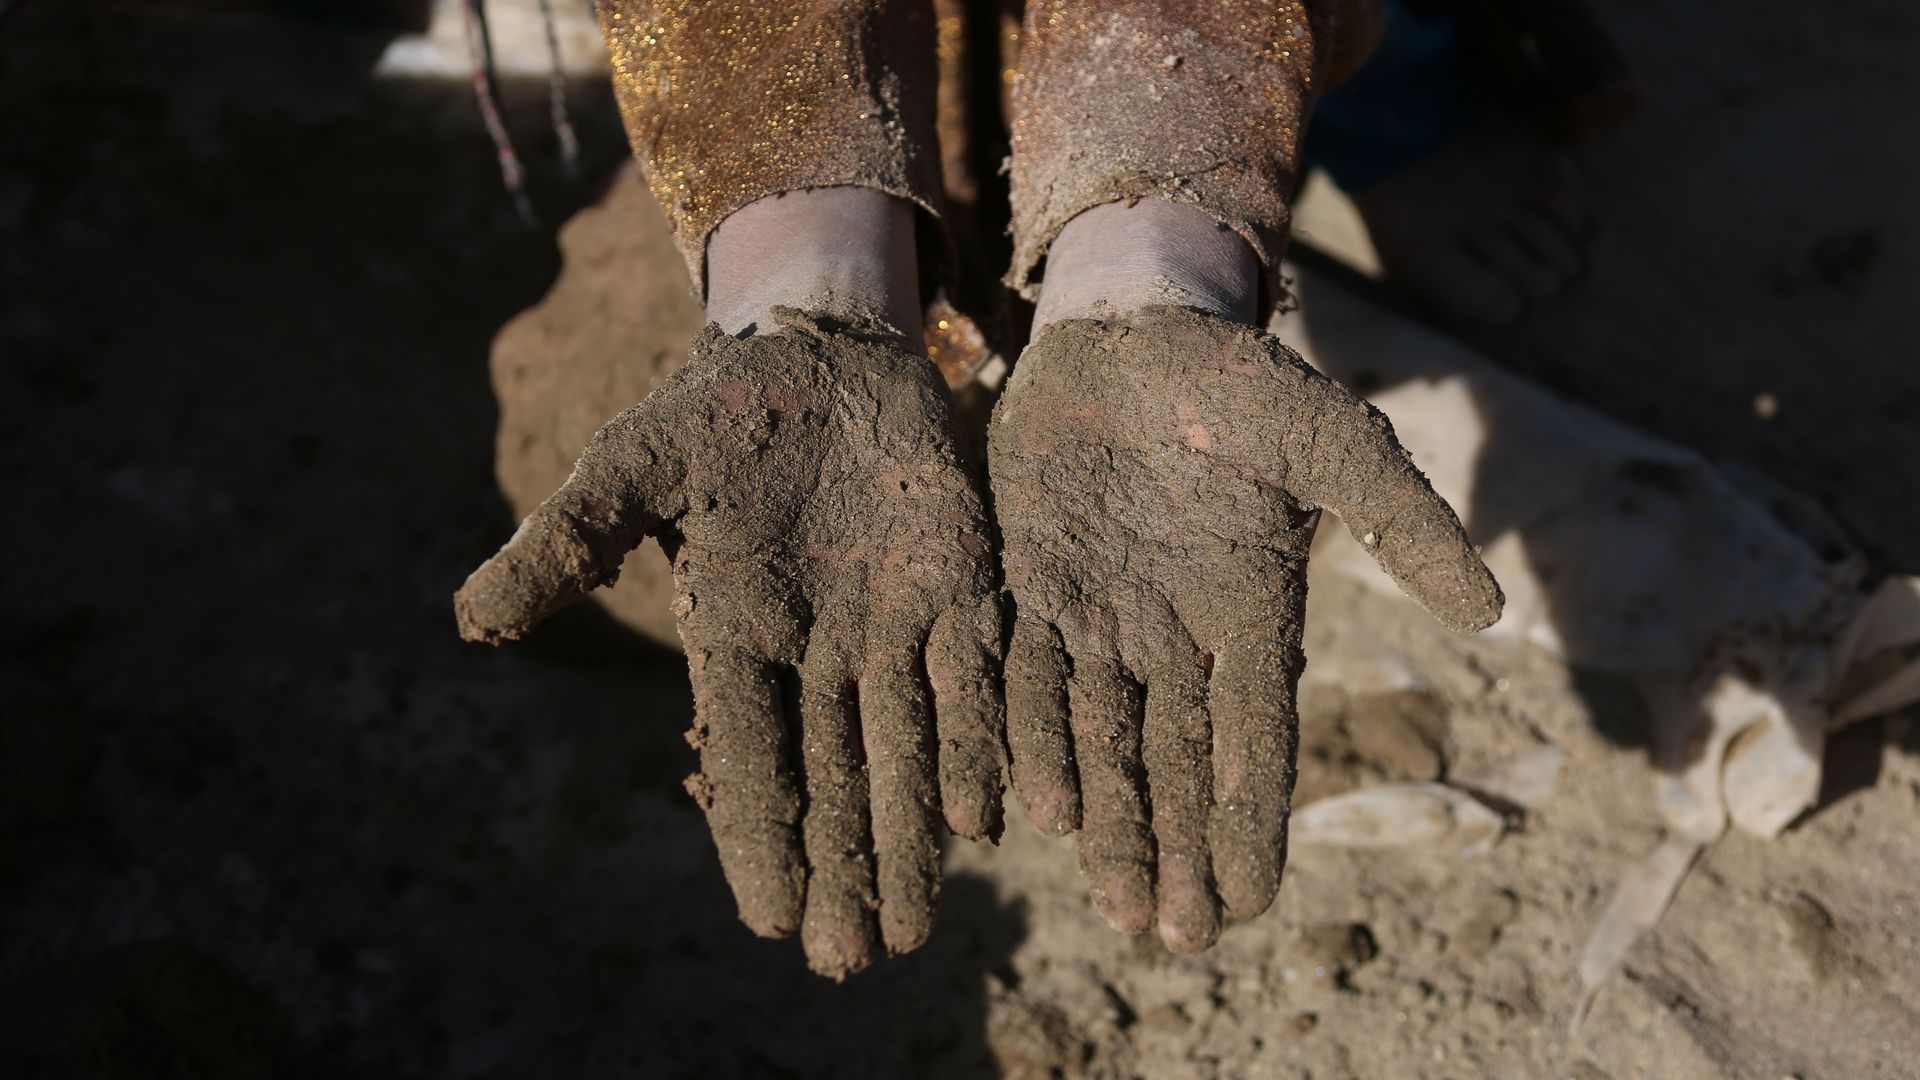 A child shows their dirt covered hands